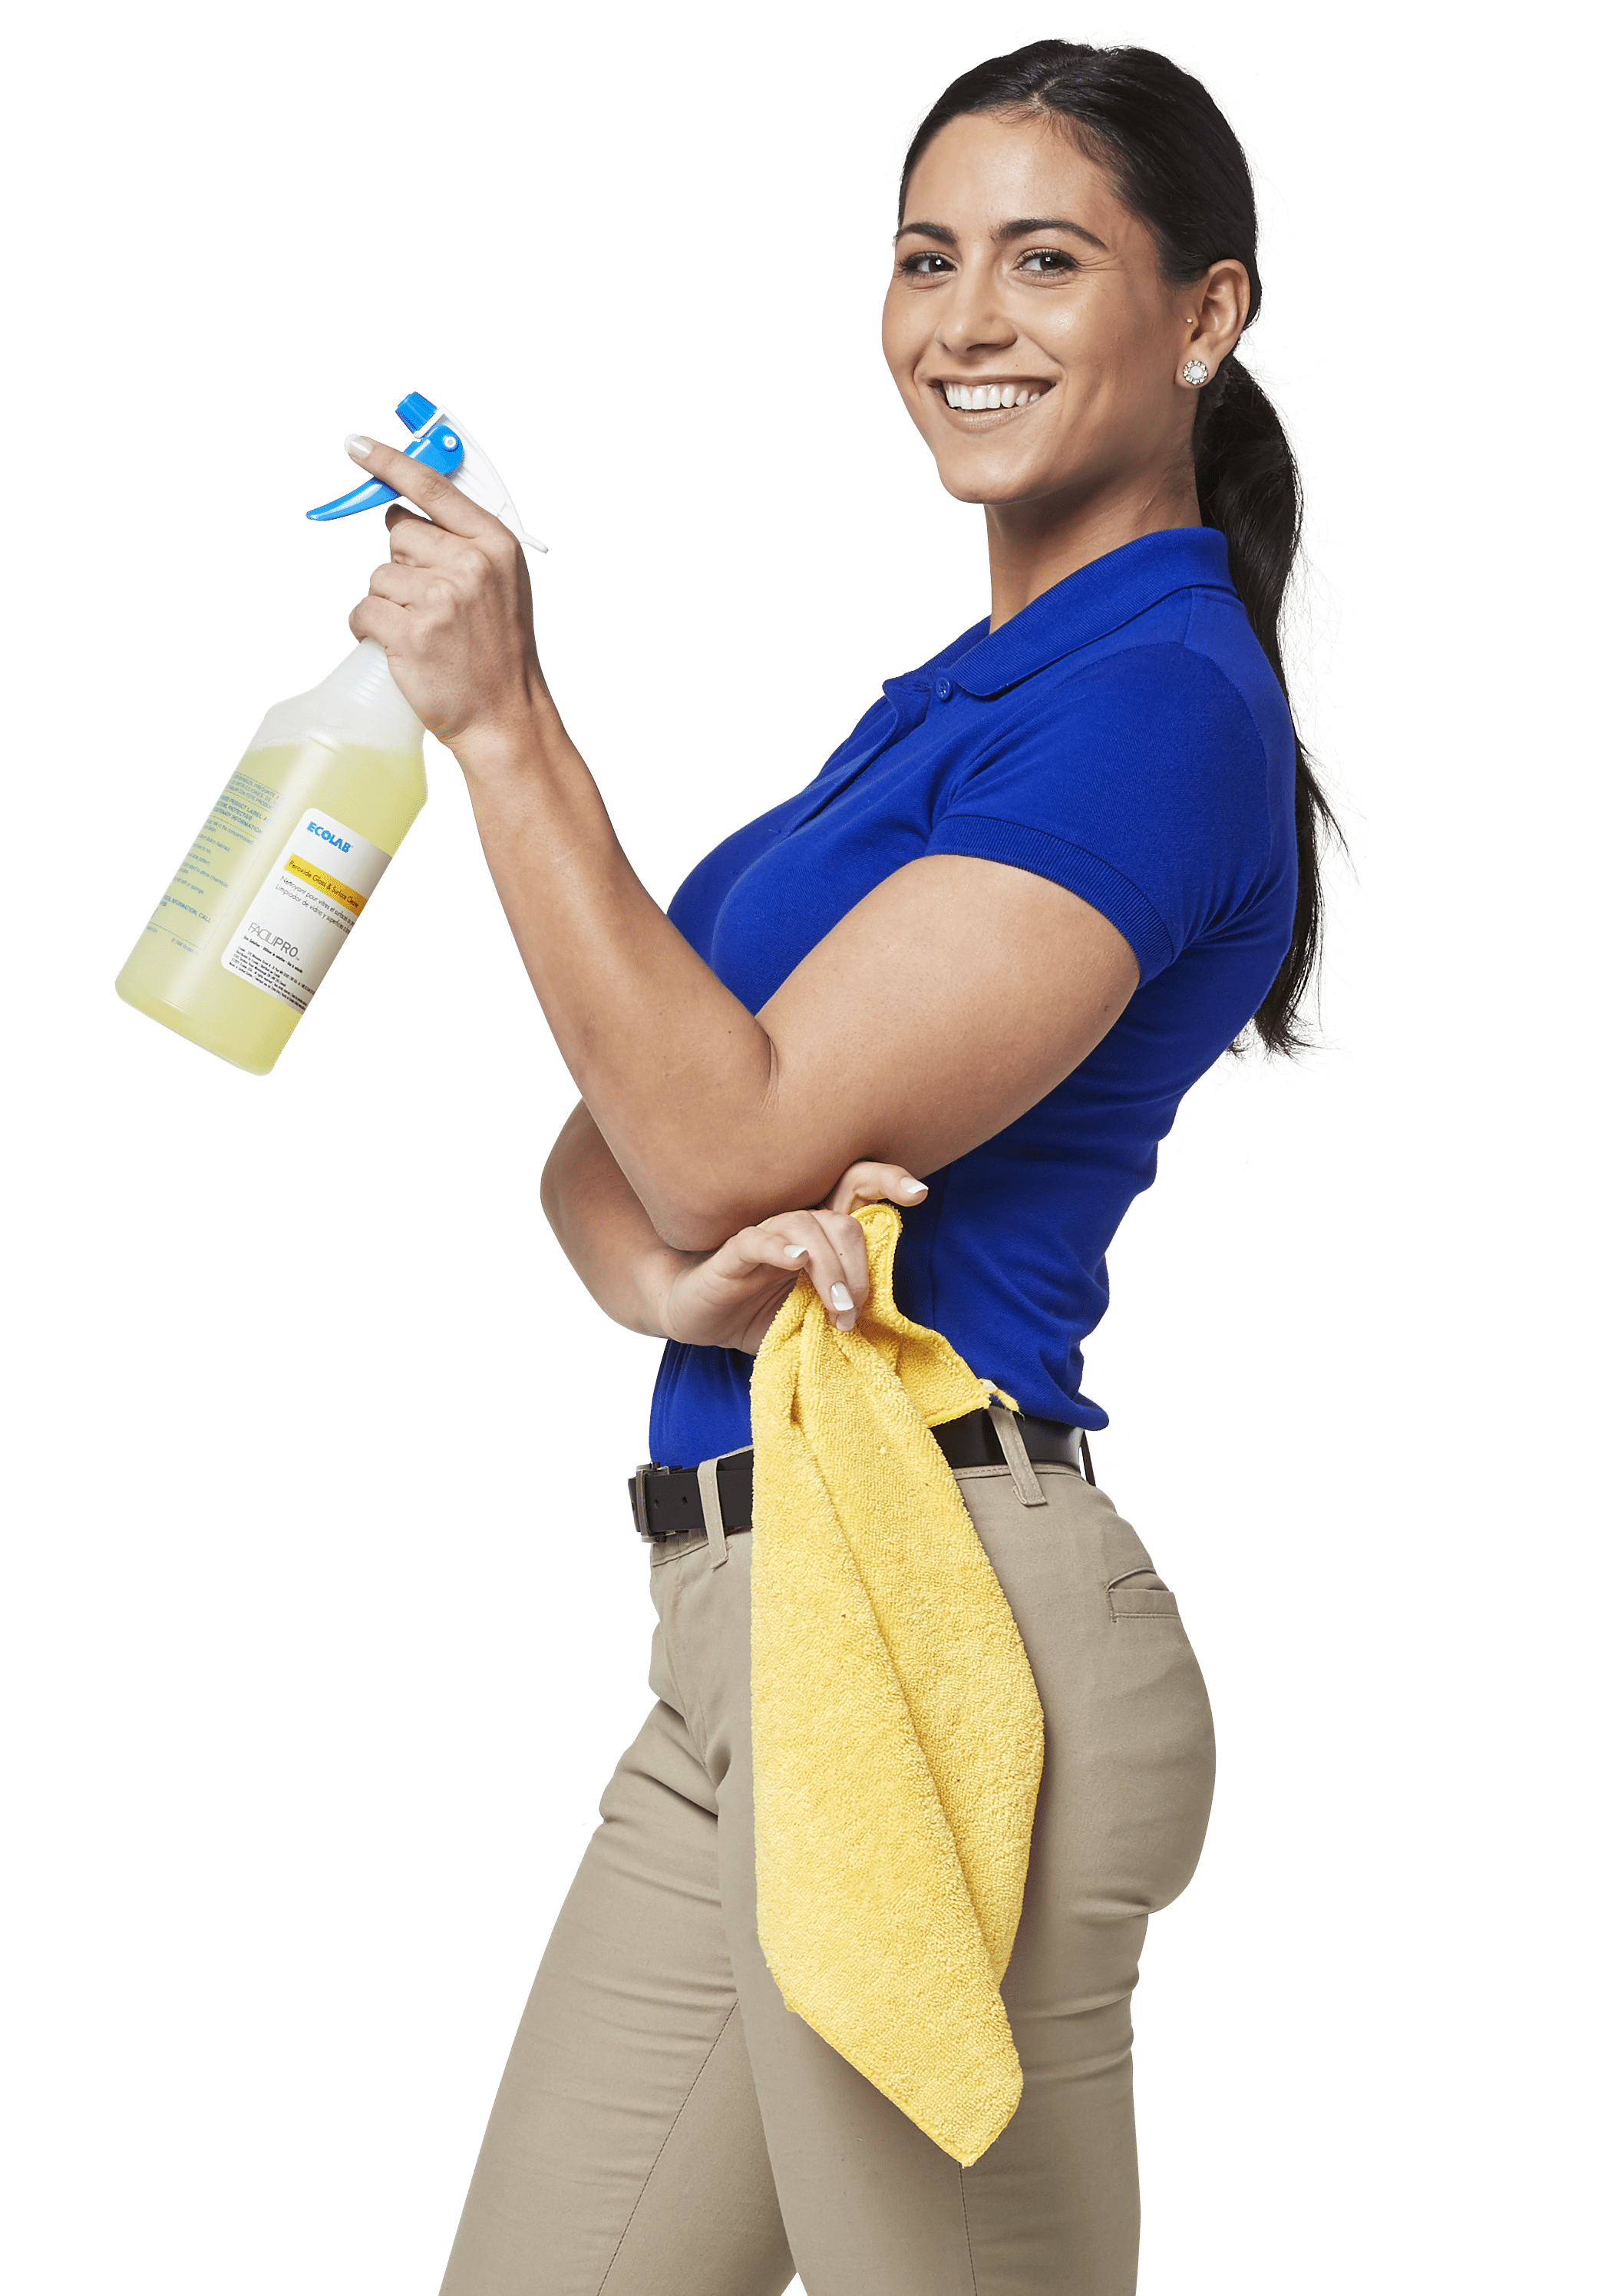 Worker With Single Spray Bottles